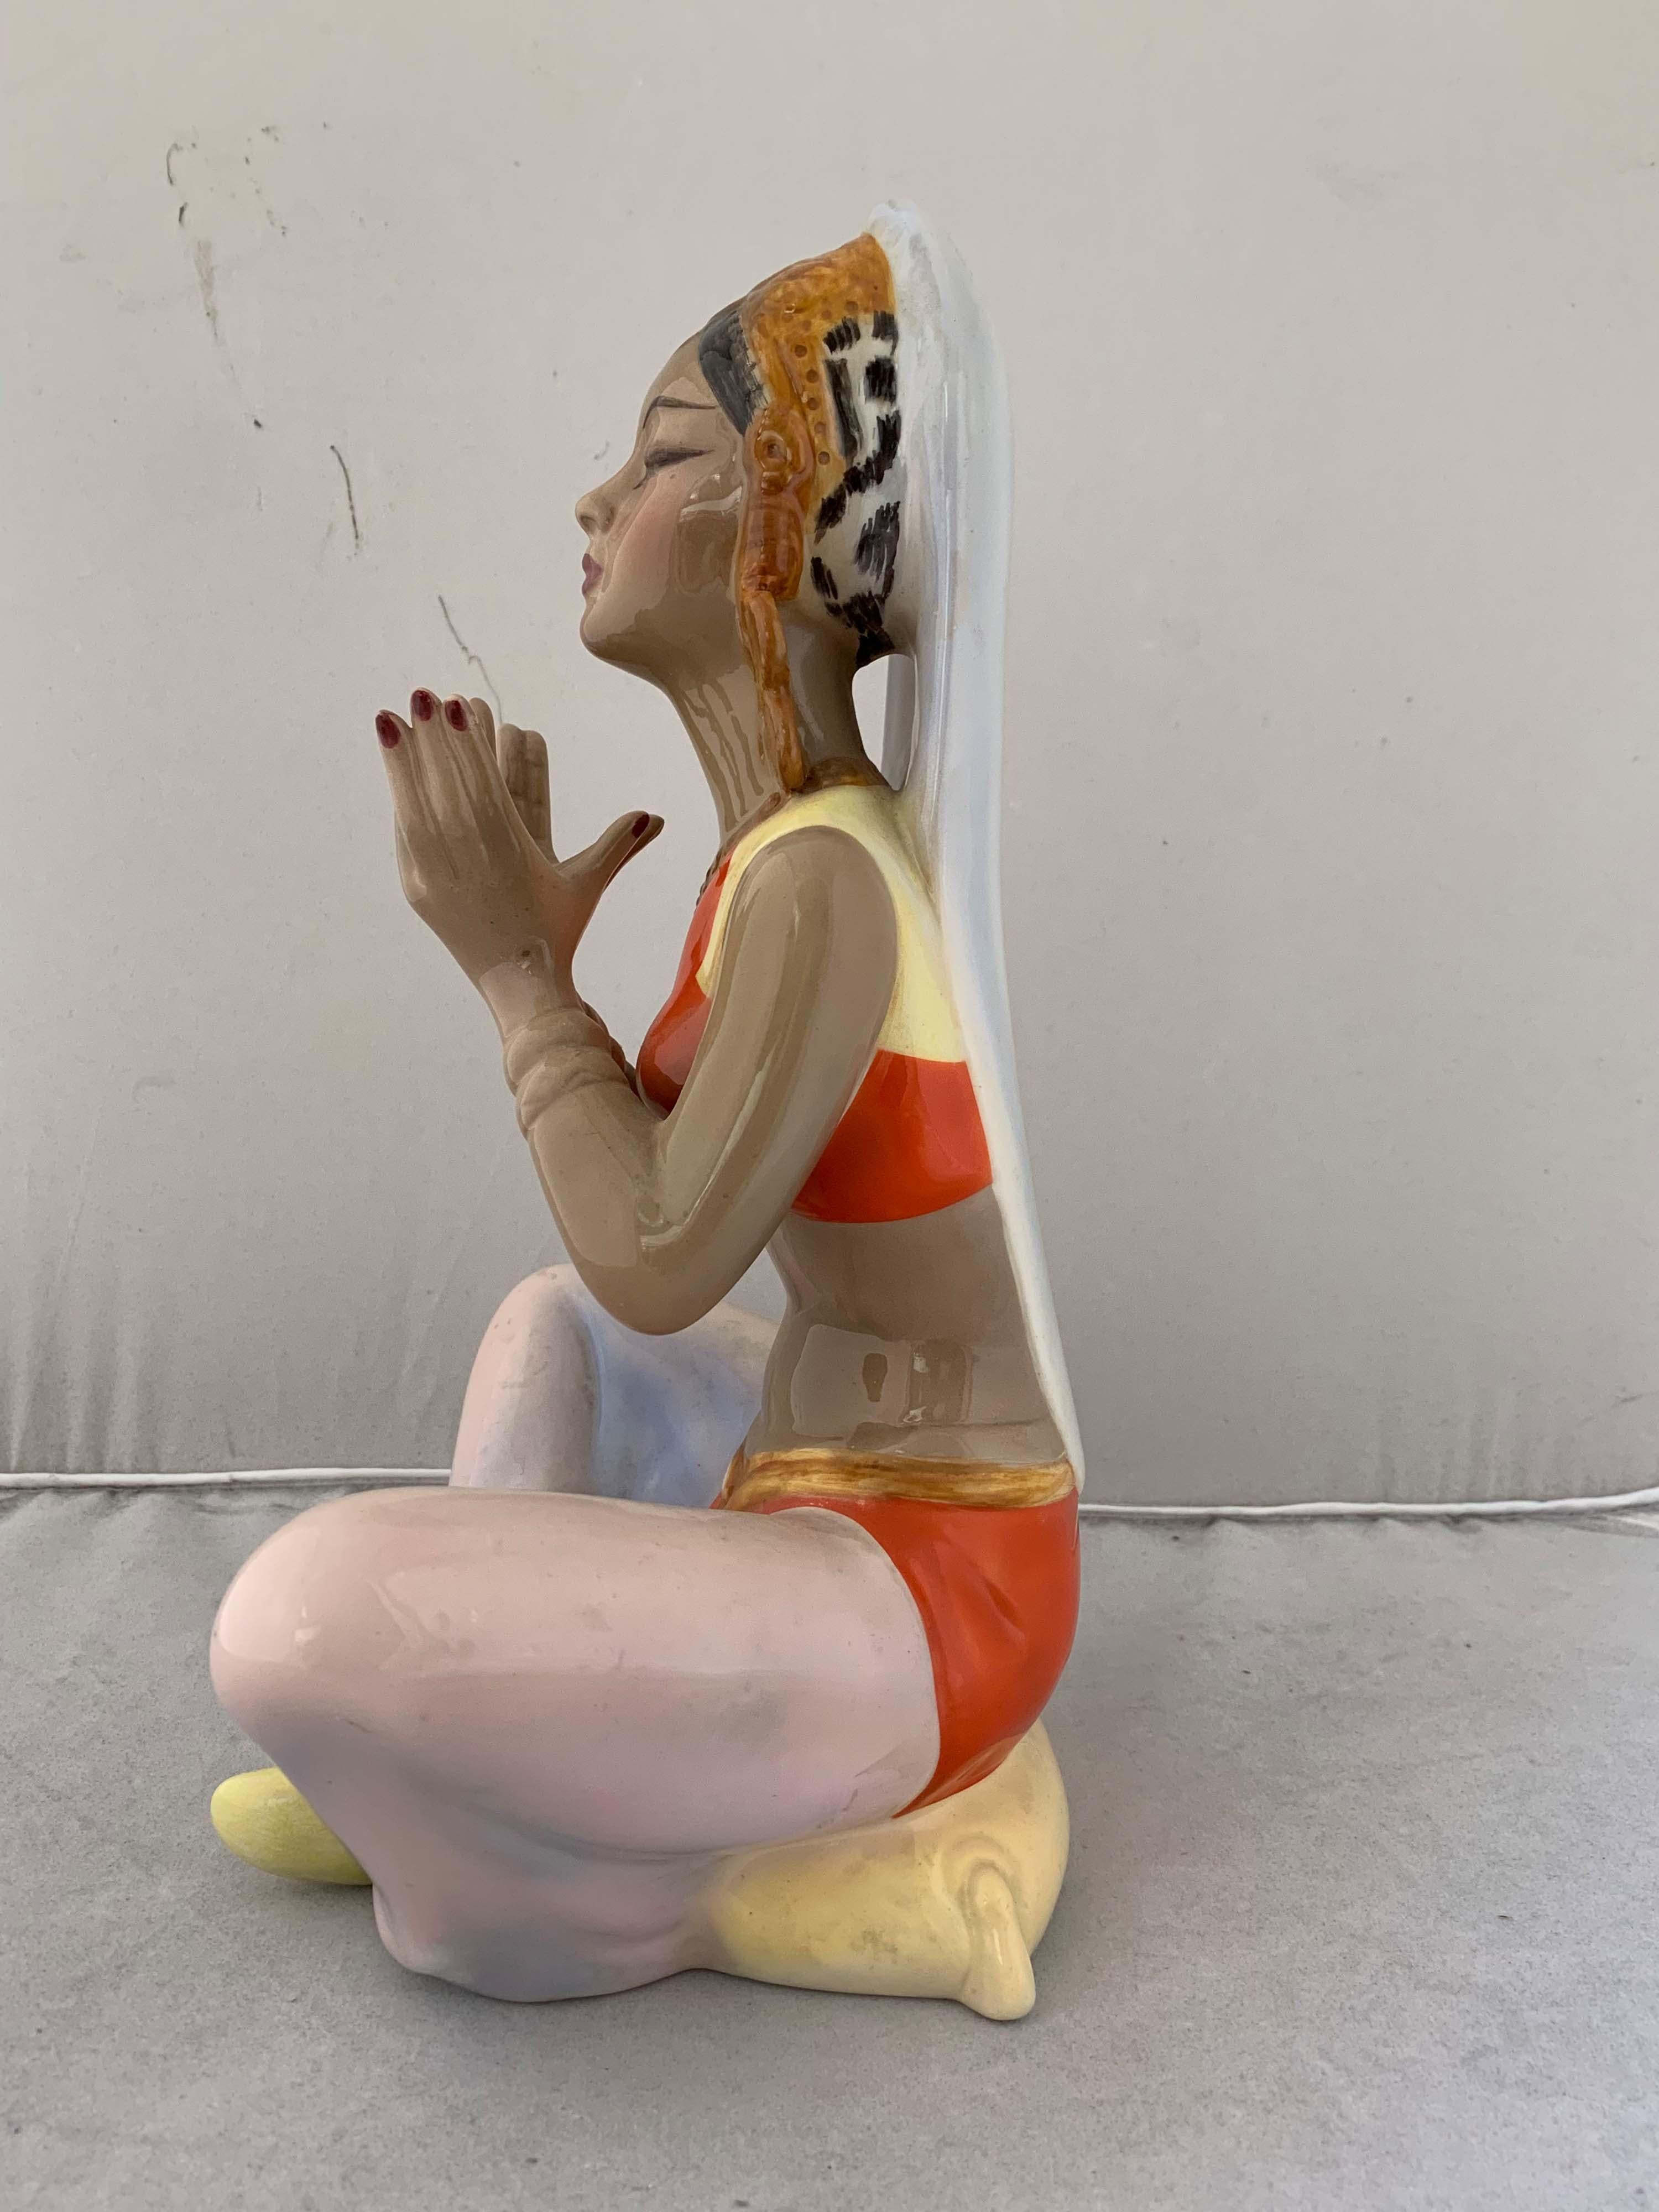 Figure of a Girl in a Meditative Pose by Caterina Manna for C.I.A. Manna Torino 2